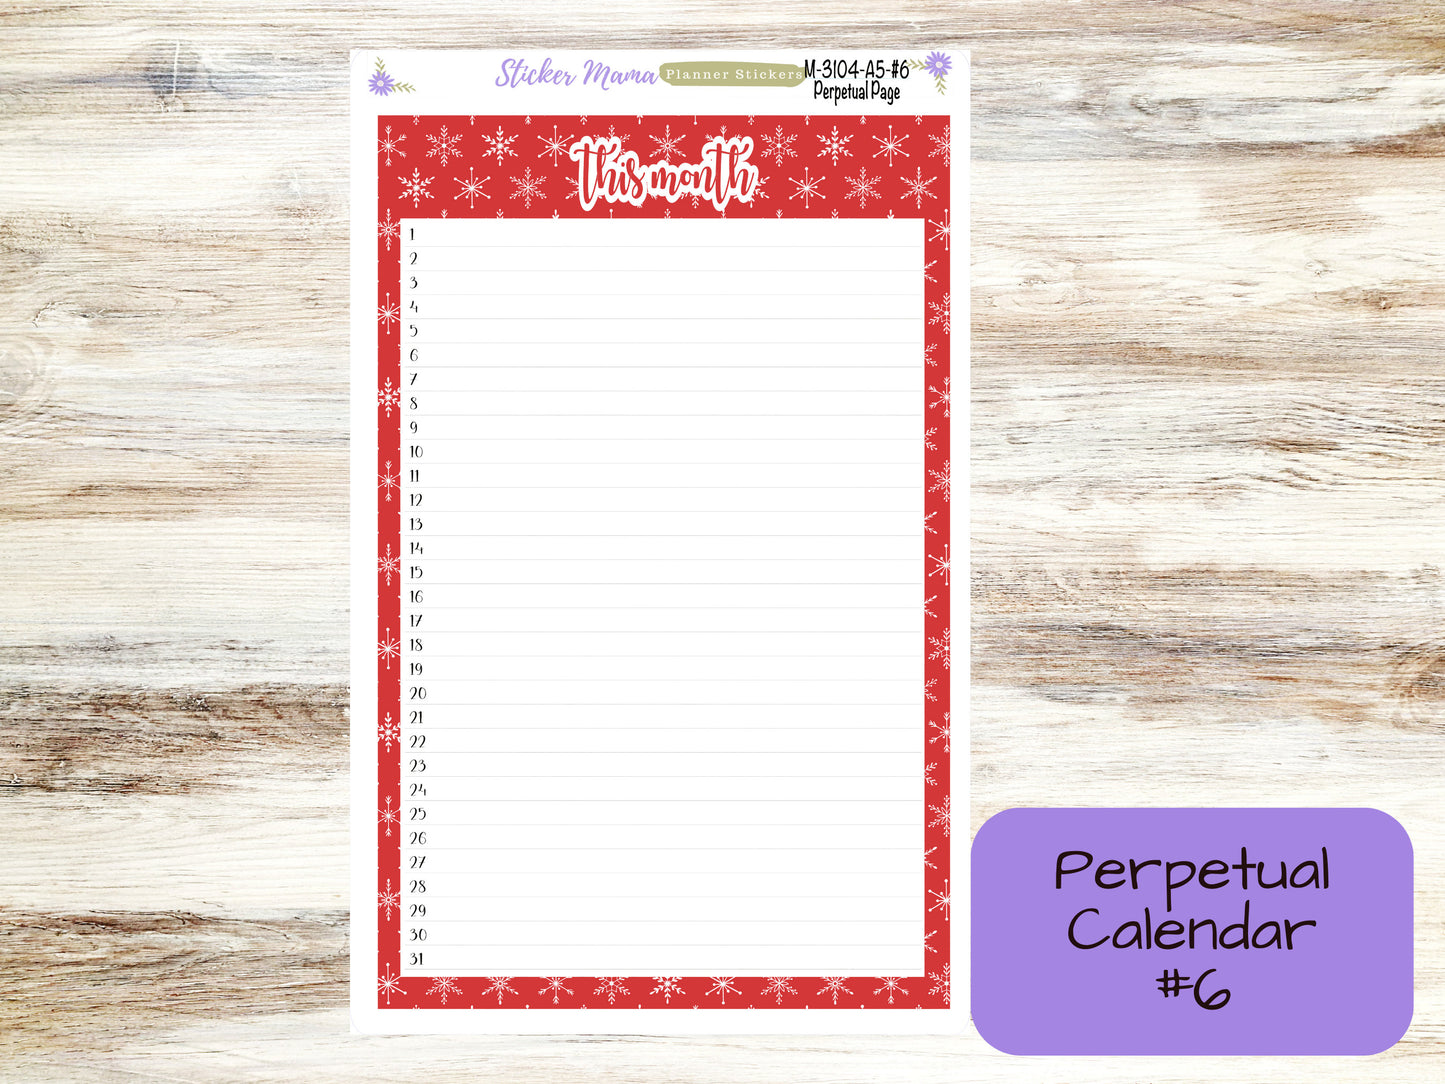 MONTHLY KIT-3104 || A5 || Santa's Here  || - ec December Monthly Kit - December Monthly Planner Kits - Monthly Pages